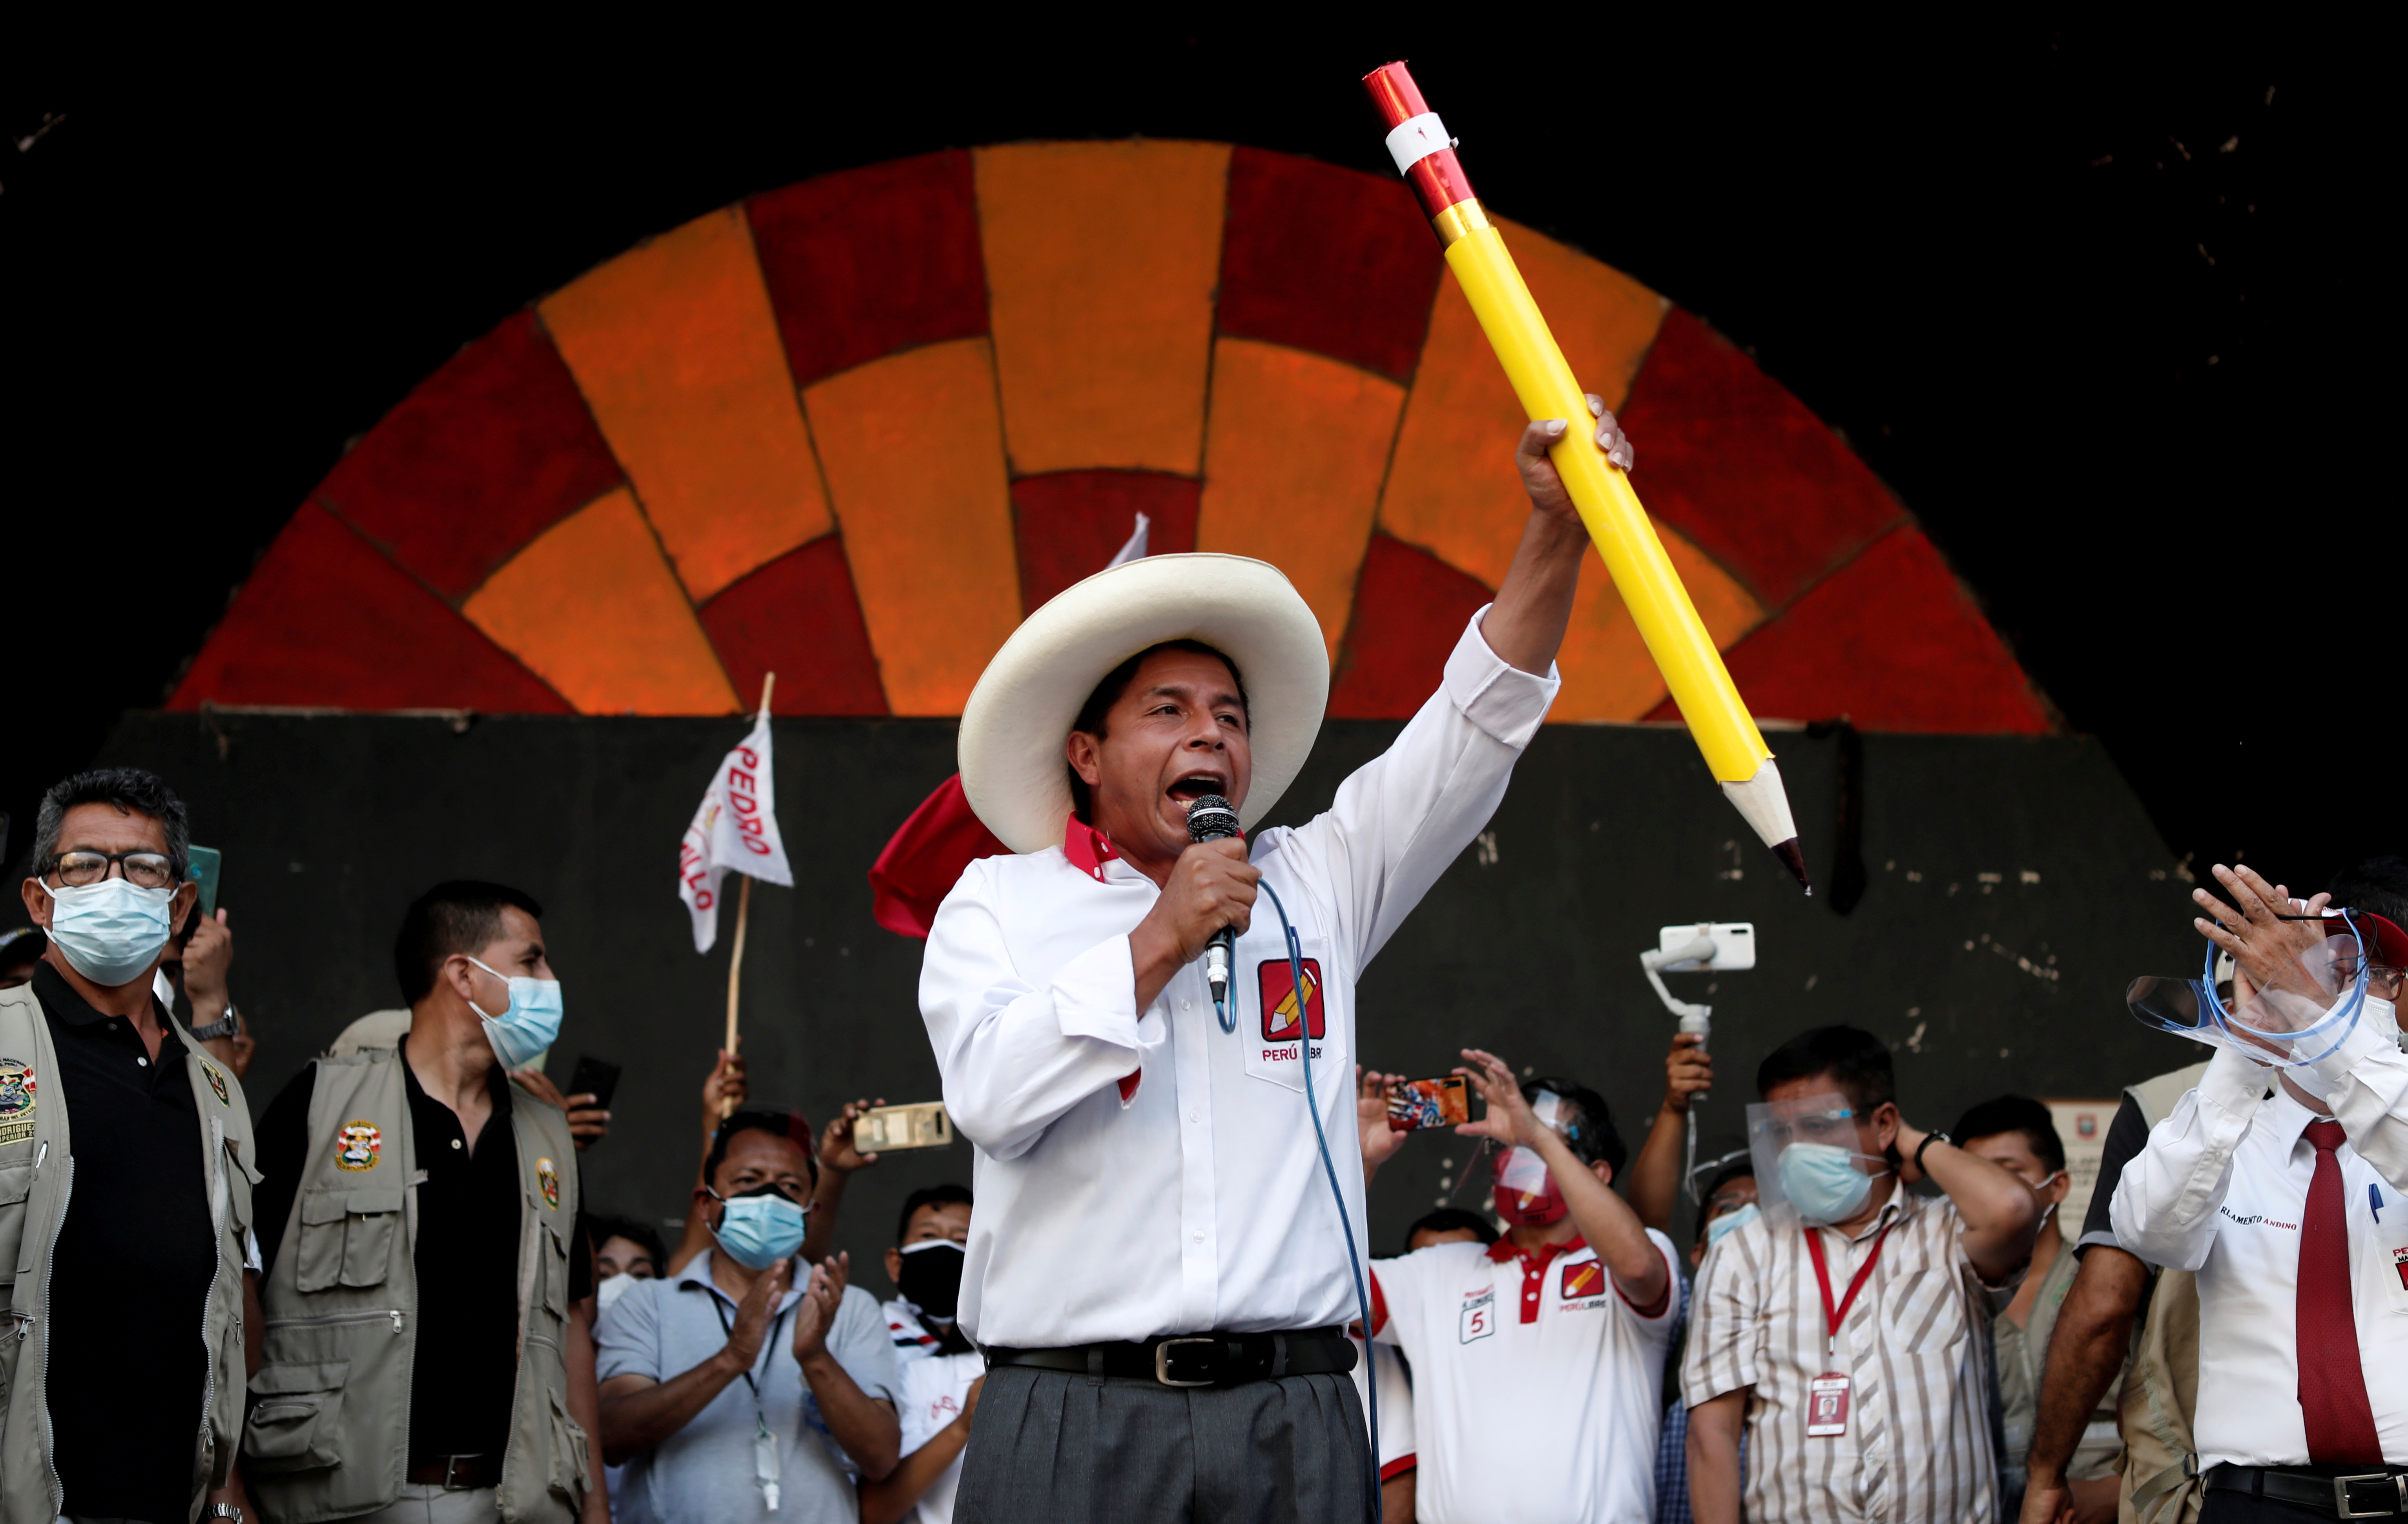 FILE PHOTO: Peru's presidential candidate Pedro Castillo of Peru Libre party, who will compete head-to-head with right-wing candidate Keiko Fujimori in a second-round ballot in June, speaks to supporters during a rally in Lima, Peru/File Photo